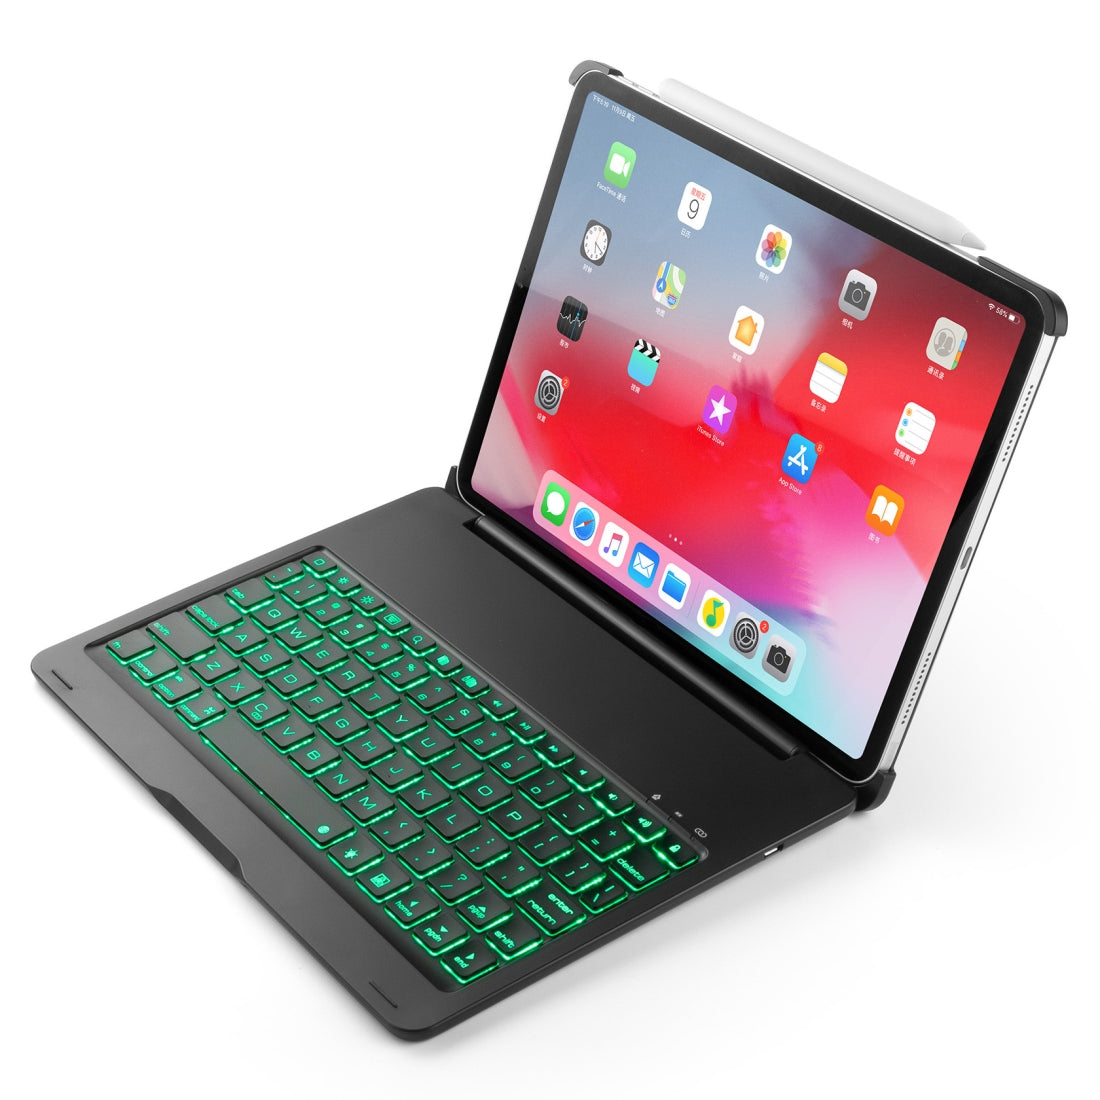 F105A Colorful Backlight Aluminum Backplane Wireless Bluetooth Keyboard Protective Case for iPad Pro 11 inch ?2018? (Black)